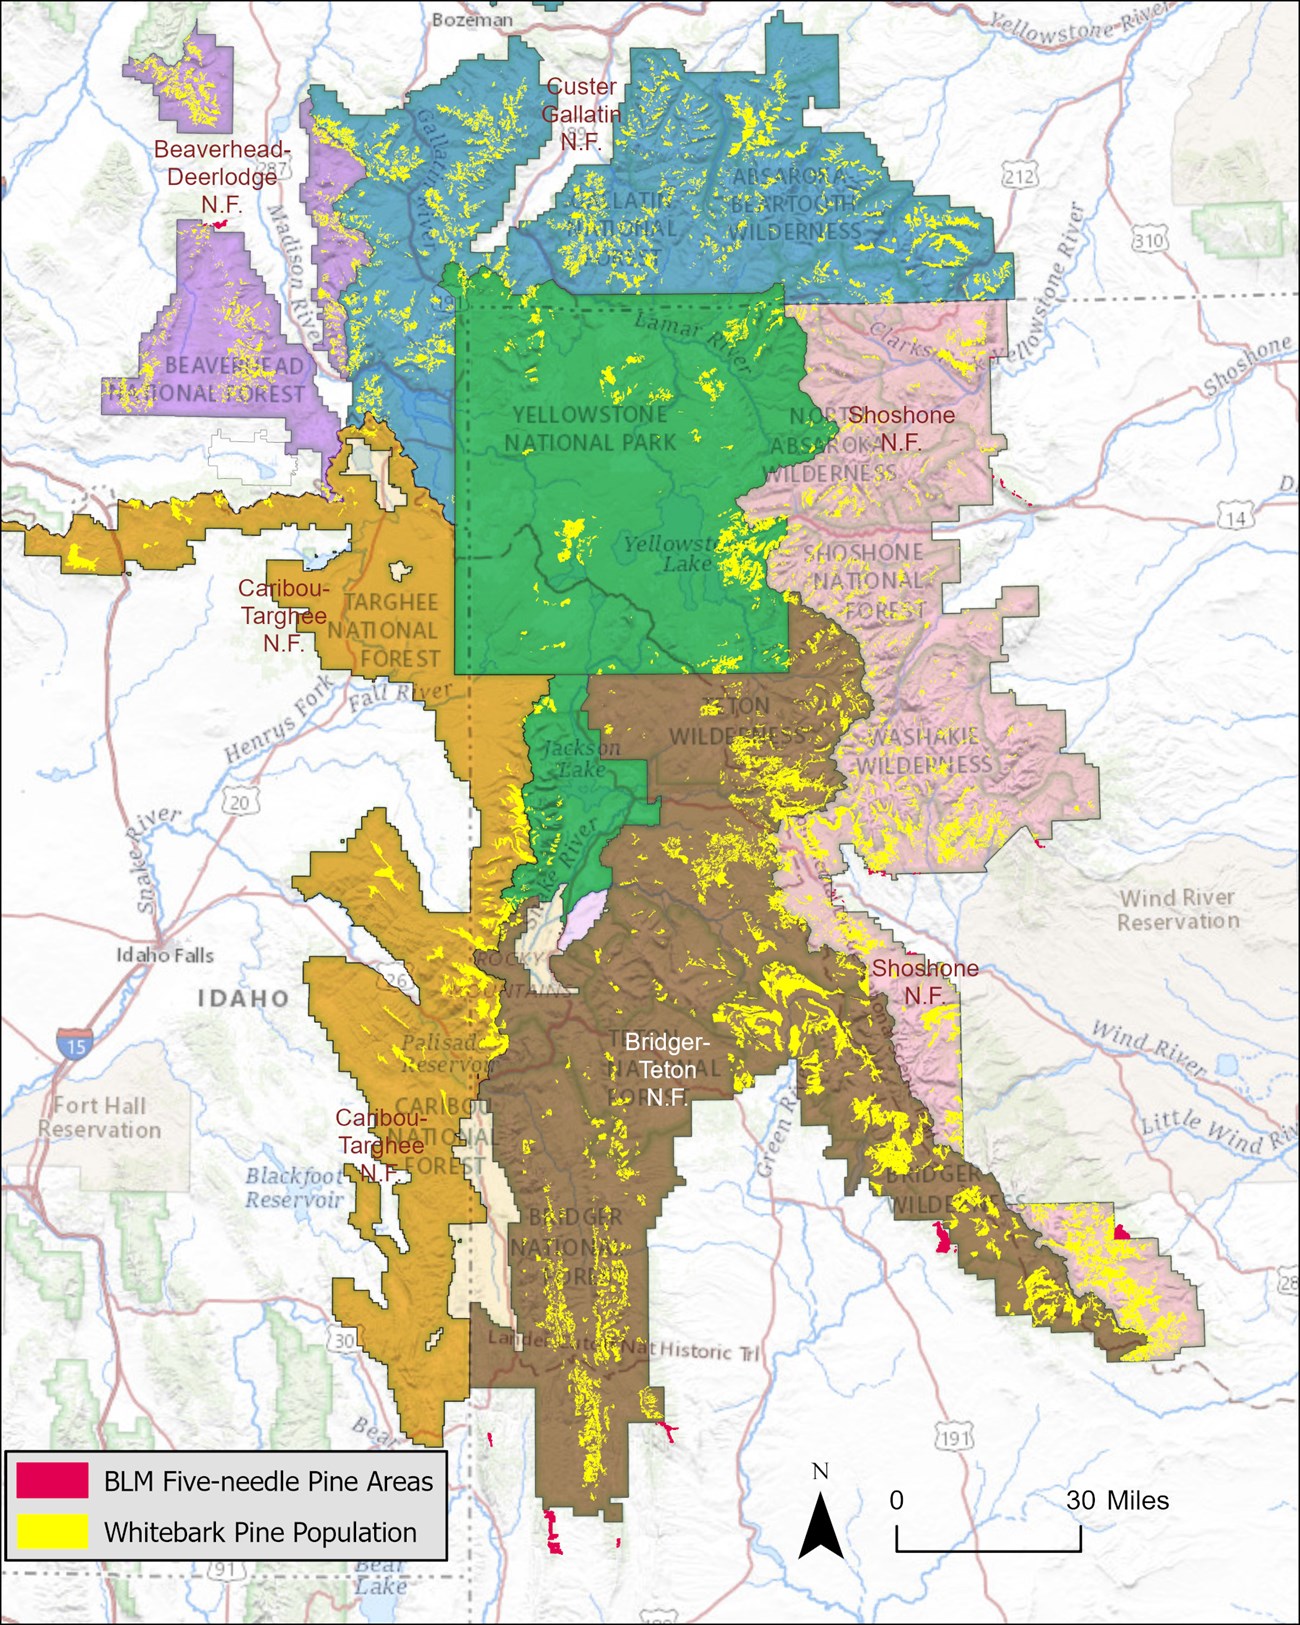 Map of the Greater Yellowstone Ecosystem, with agency boundaries, showing national park lands surrounded by several different forest lands.